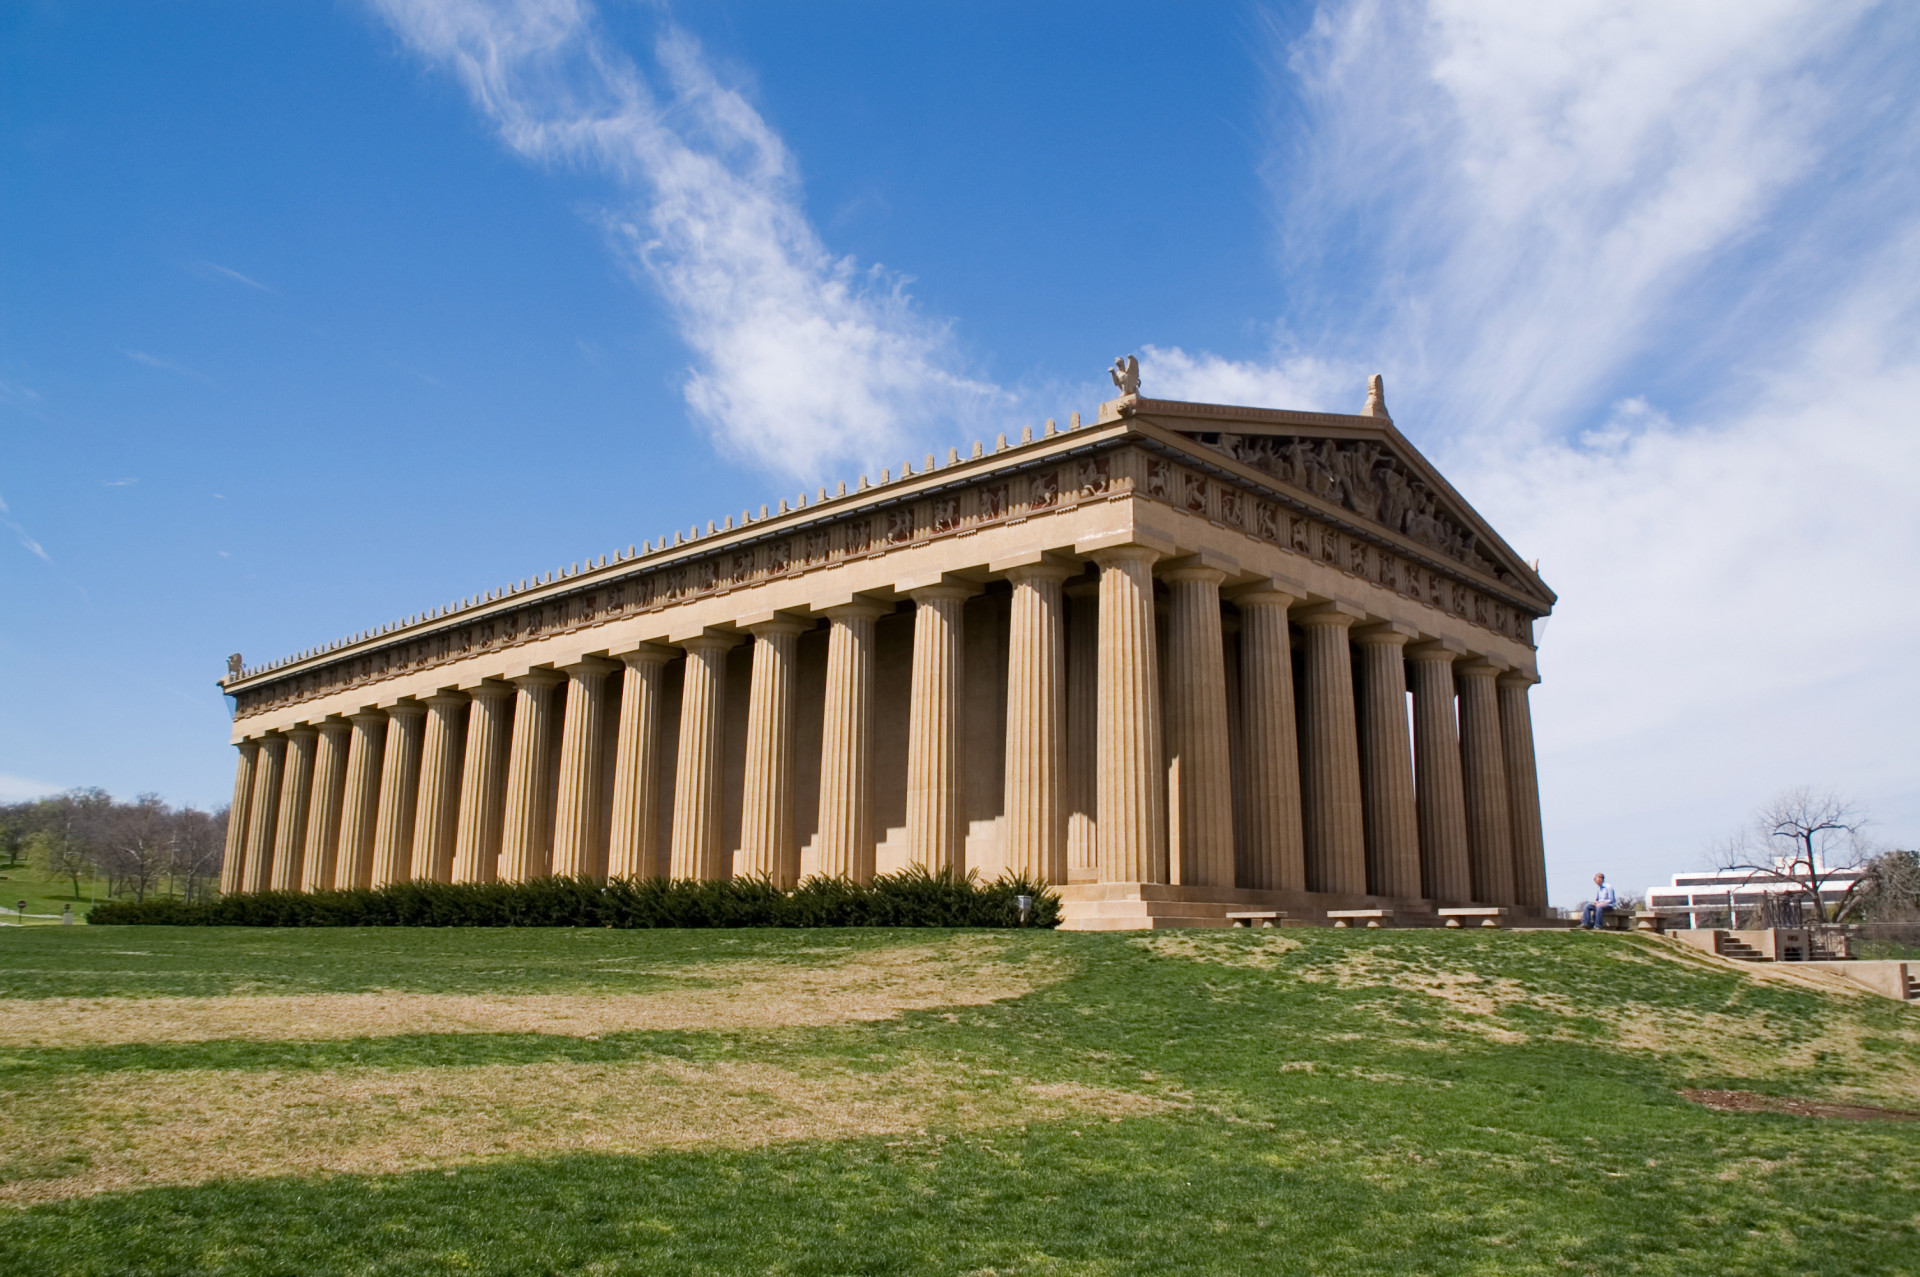 Interestingly, Nashville is home to the world’s only full-size reproduction of the Greek Parthenon.